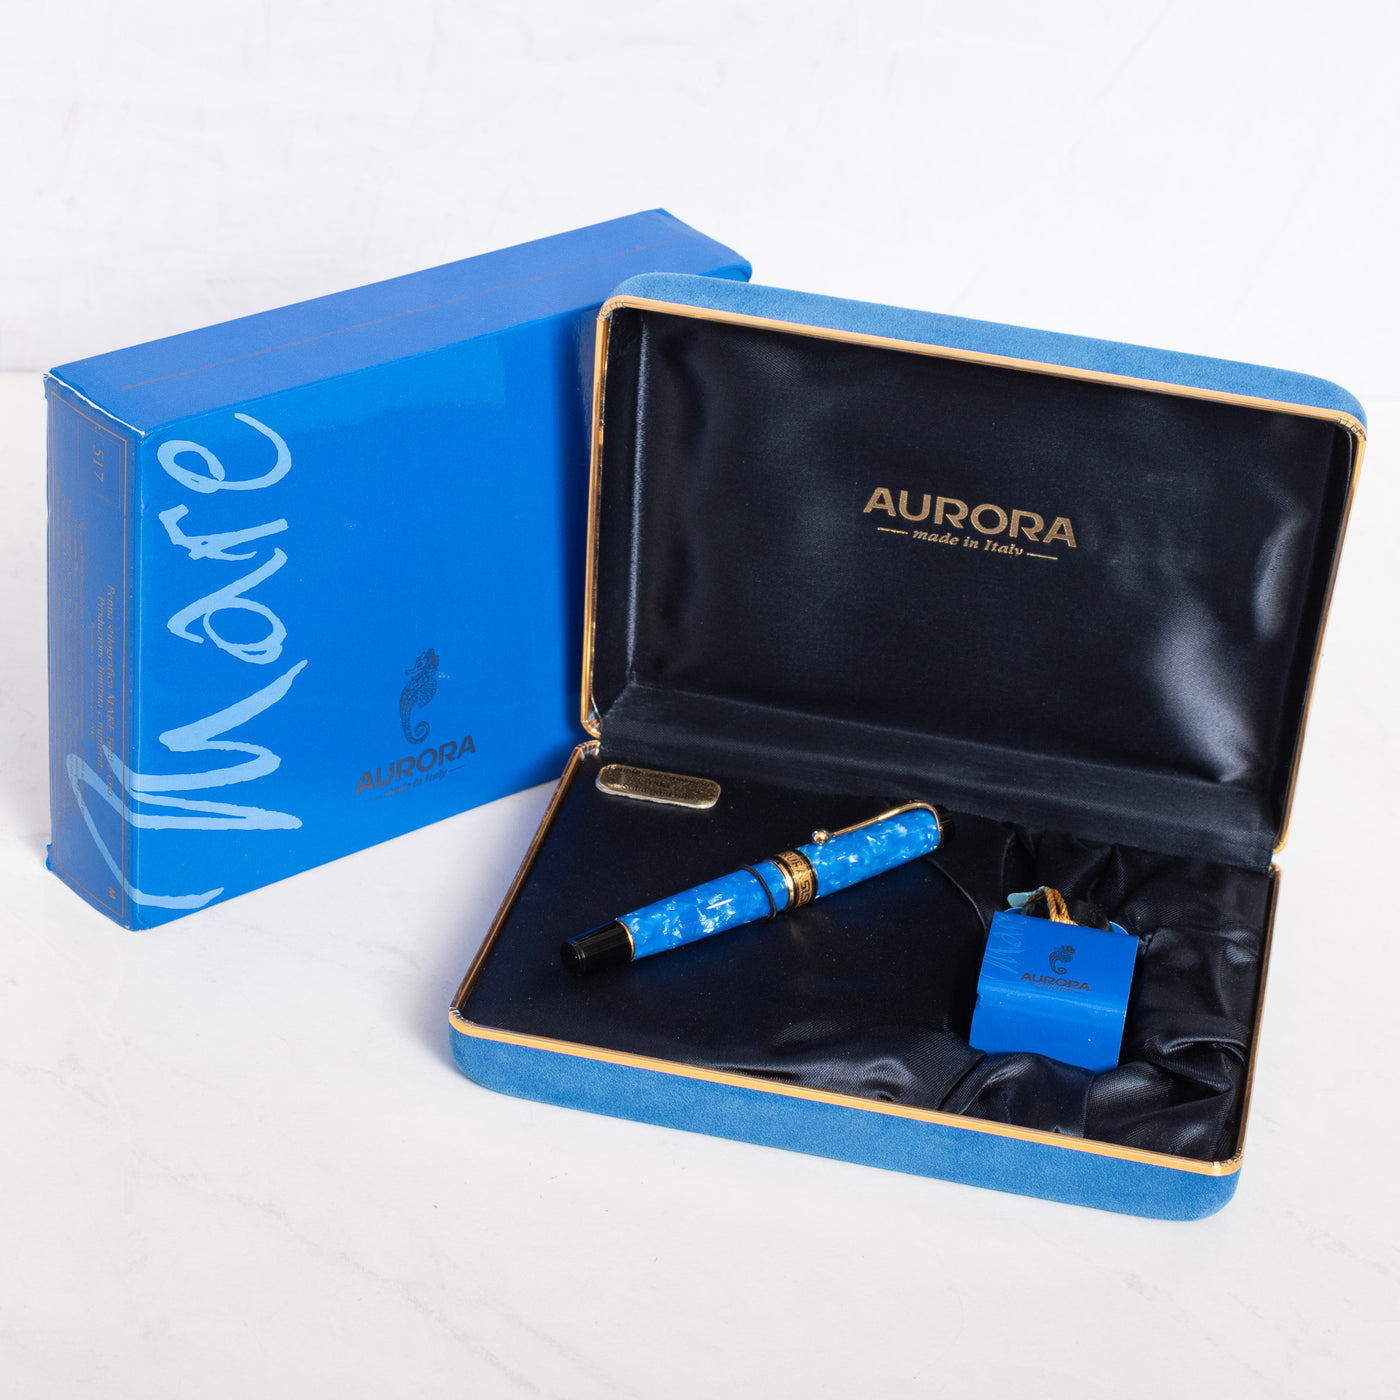 Aurora Optima Mare Limited Edition Fountain Pen packaging